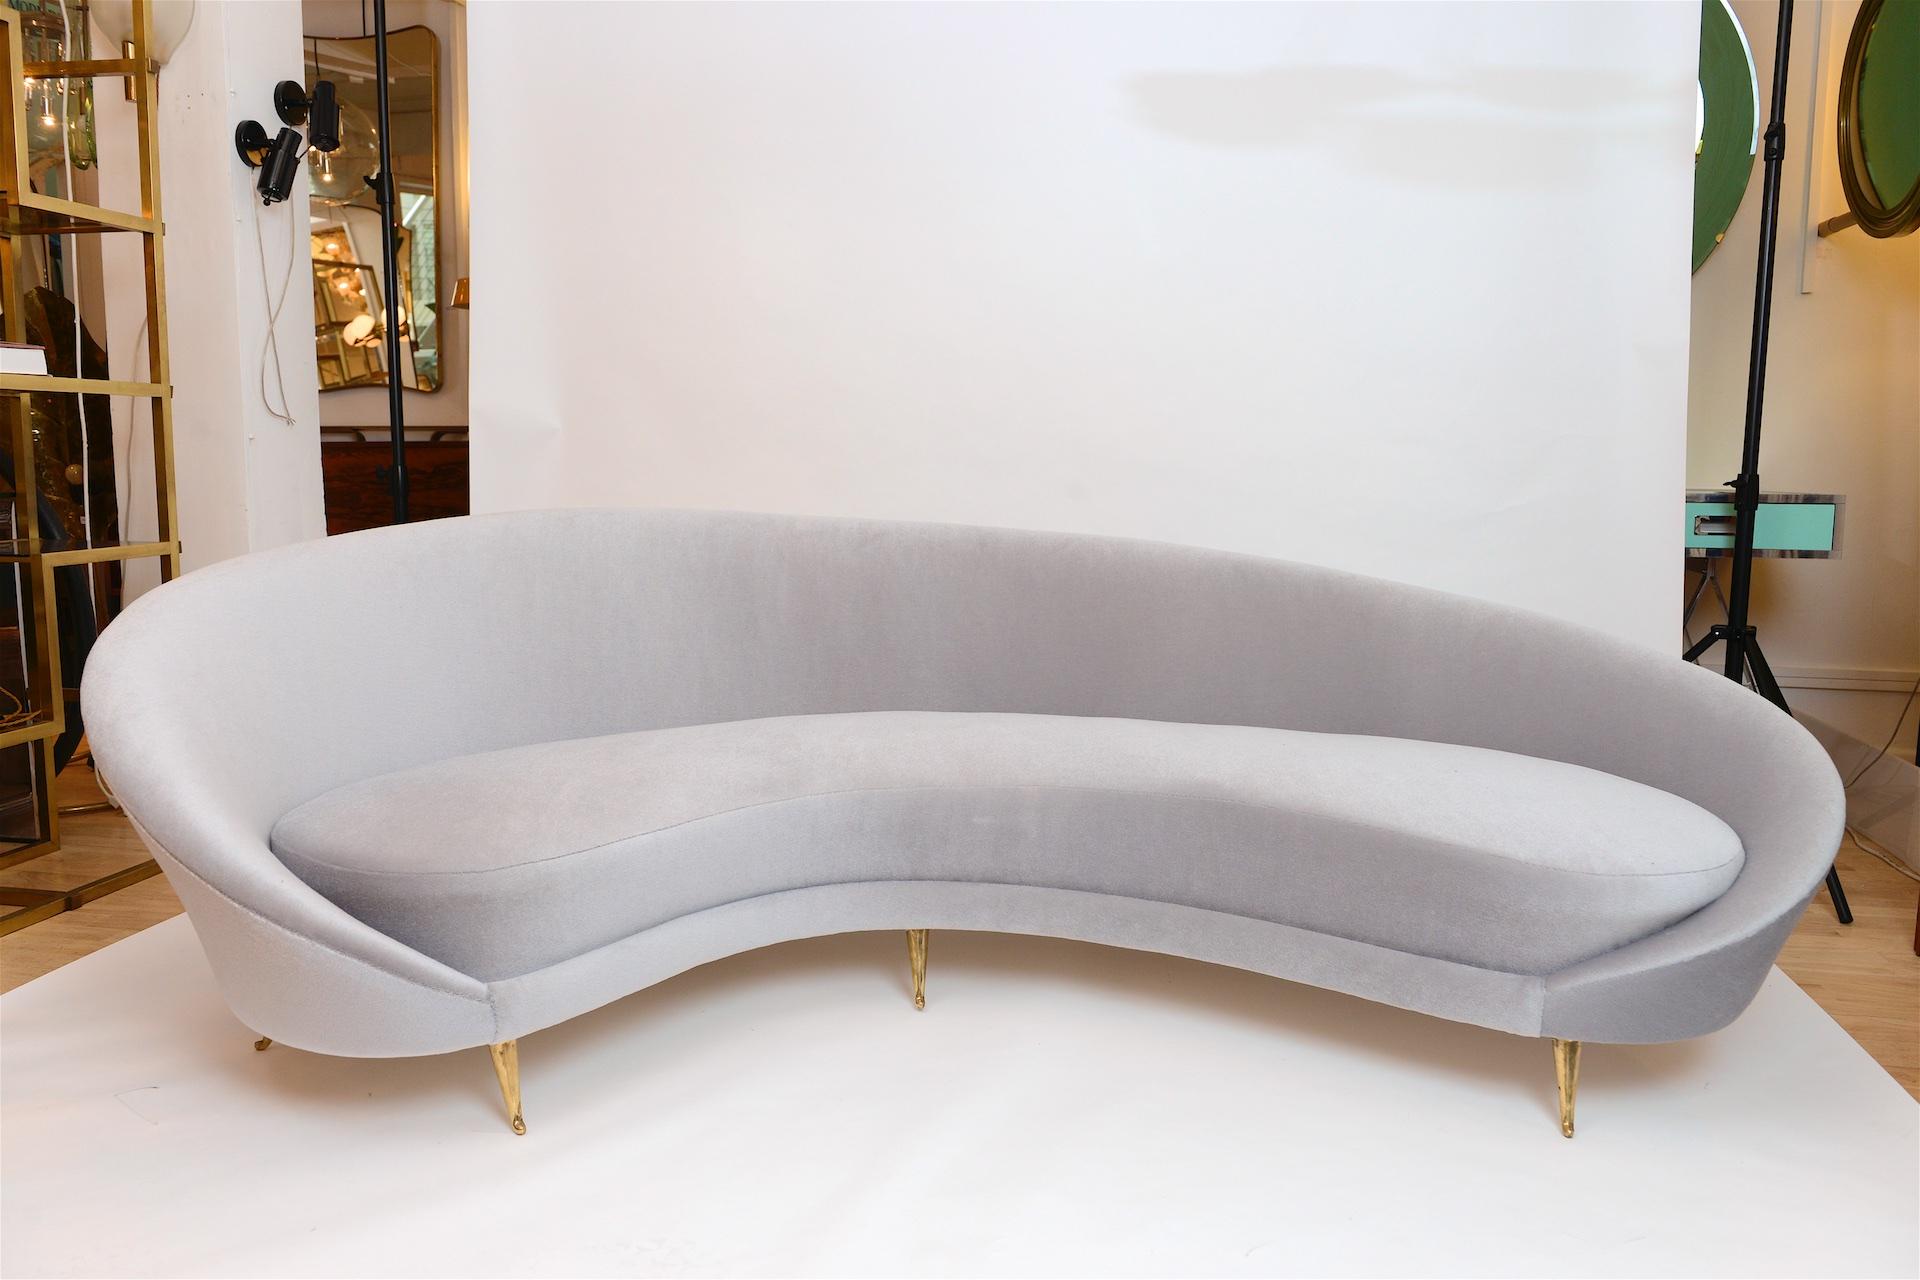 Curved sofa often attributed to Ico Parisi beautifully re upholstered in mohair velvet

An elegant and original 1950s Italian sofa with polished brass legs

** Please note this is NOT a reproduction... 

   